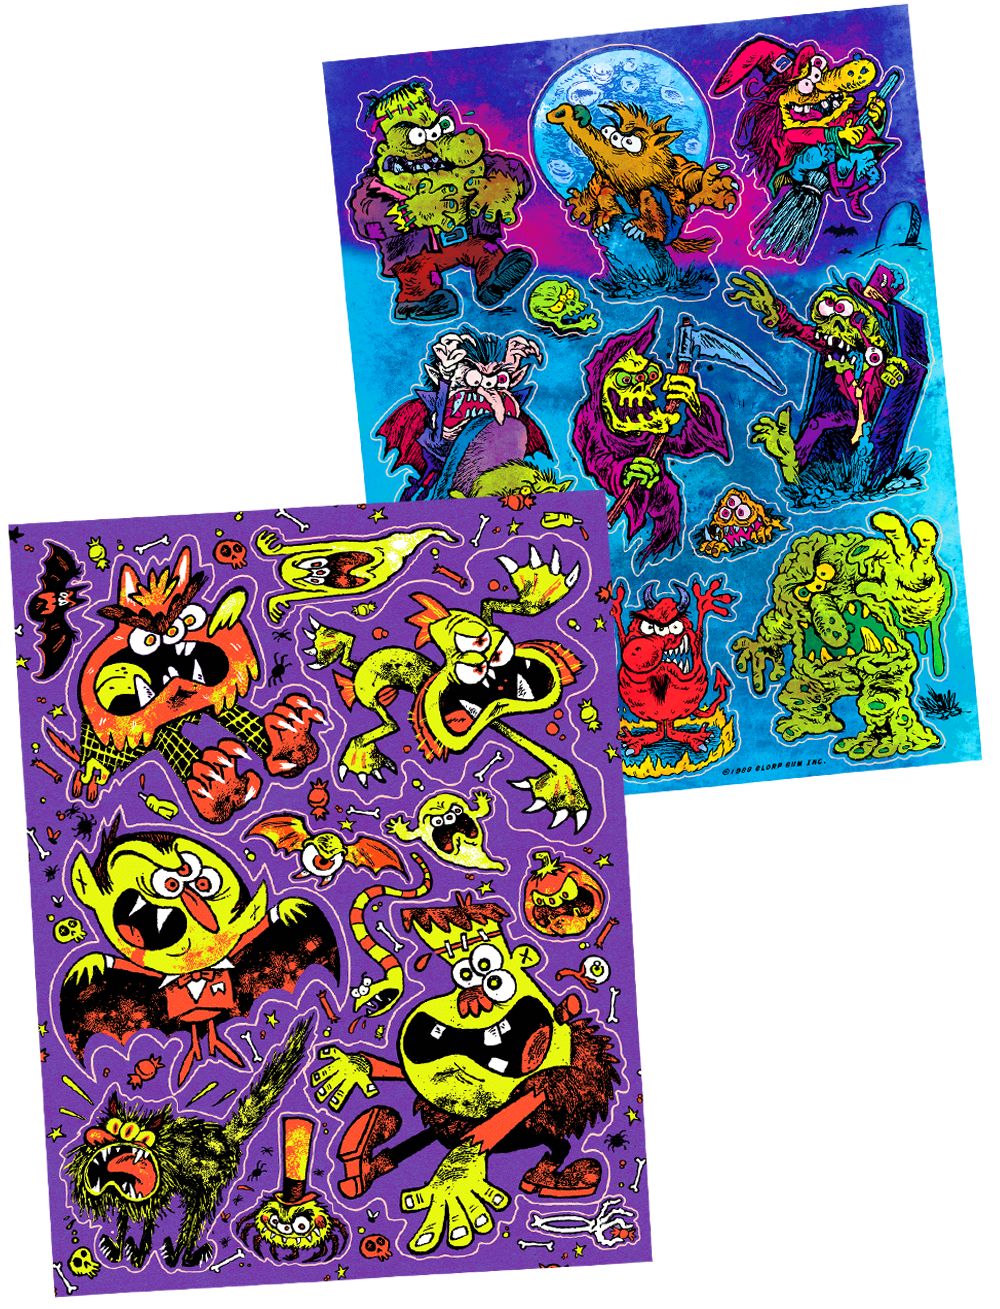 DOUBLE TROUBLE: Giant Halloween Sticker Sheet 2 pack!